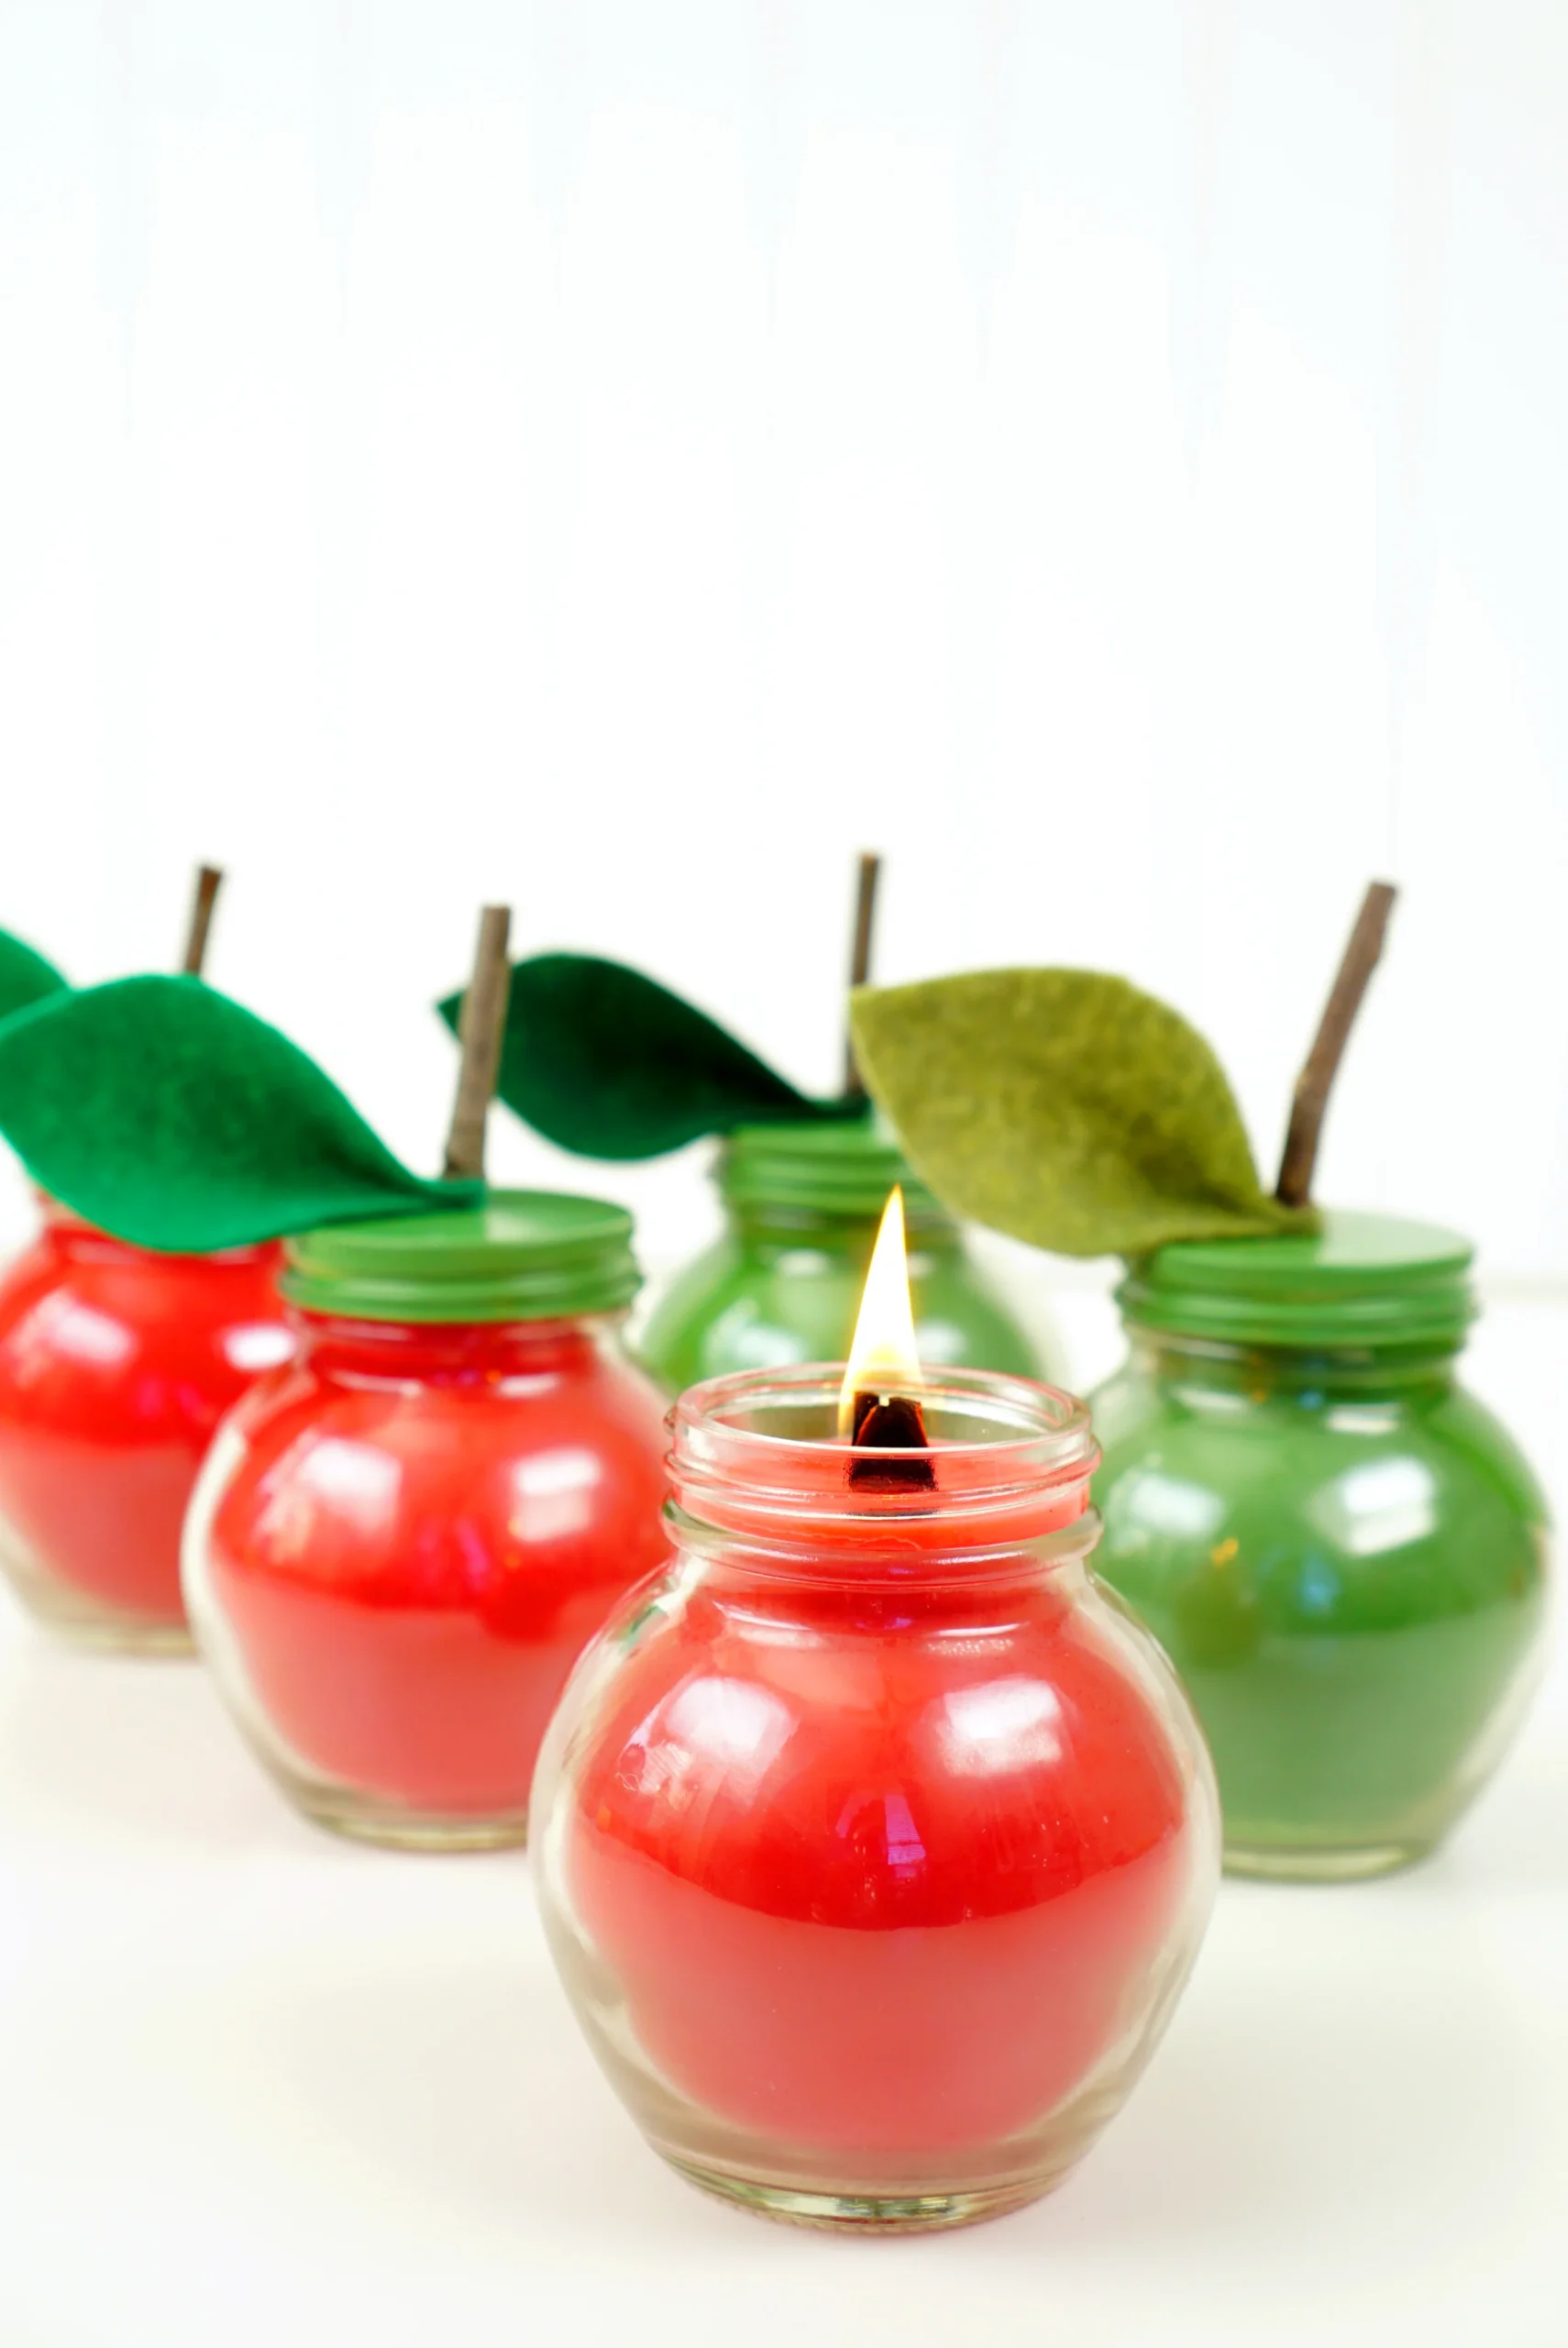 Apple spice candles